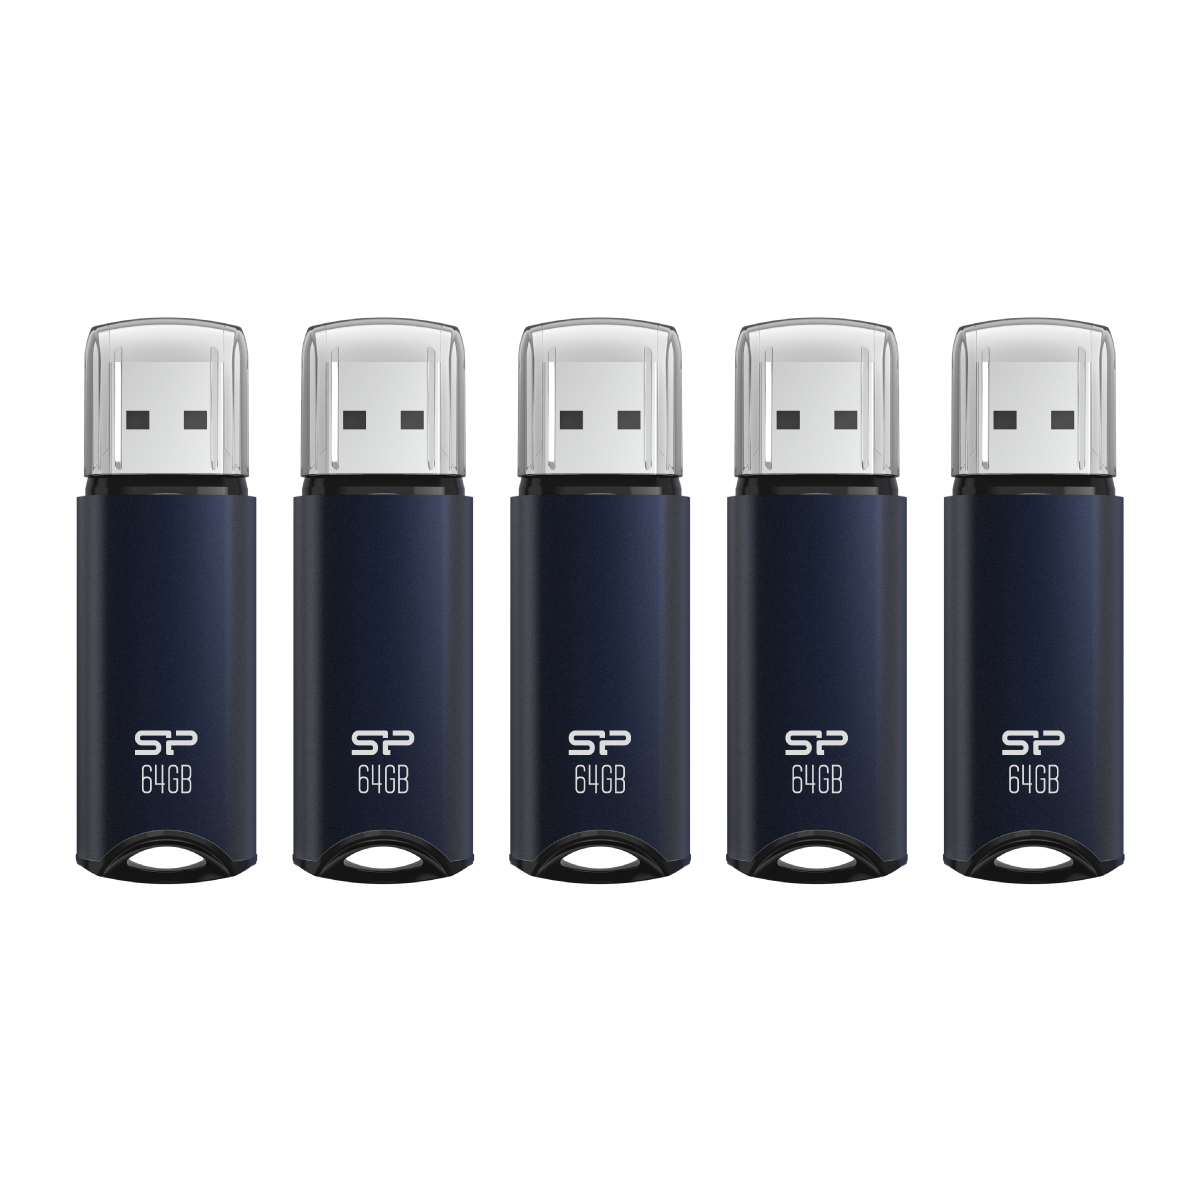 Silicon Power 64GB Marvel M02 USB 3.0 Flash Drive - Navy Blue (5-Pack)